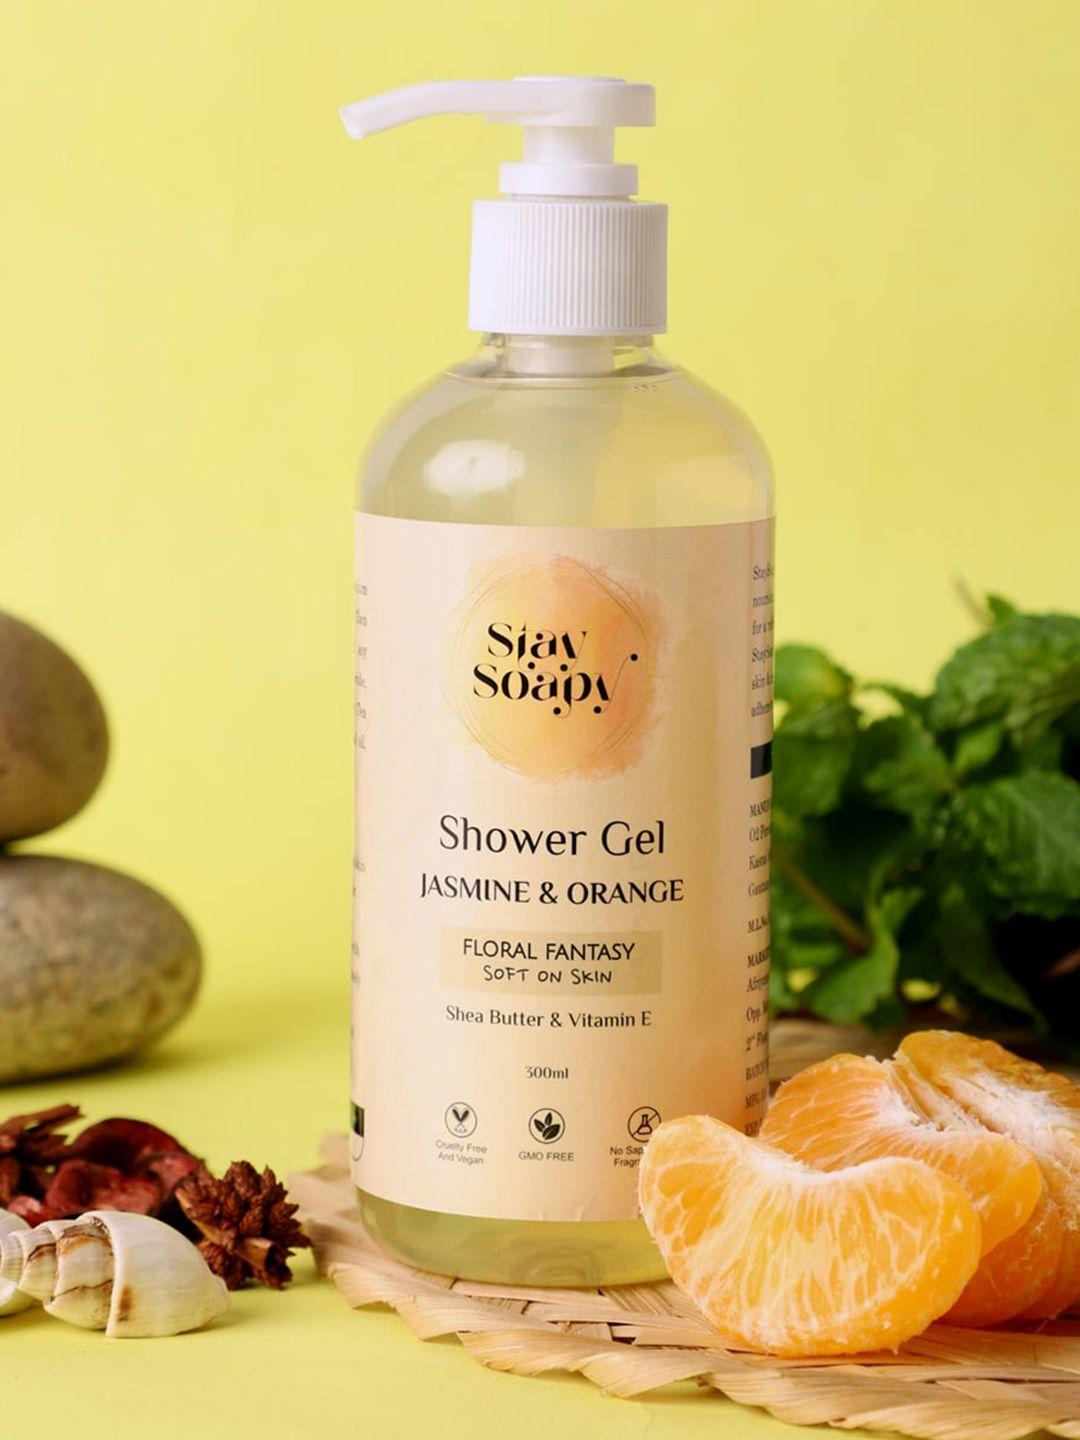 stay soapy set of 4 jasmine & orange with shea butter & vitamin e shower gel 300ml each